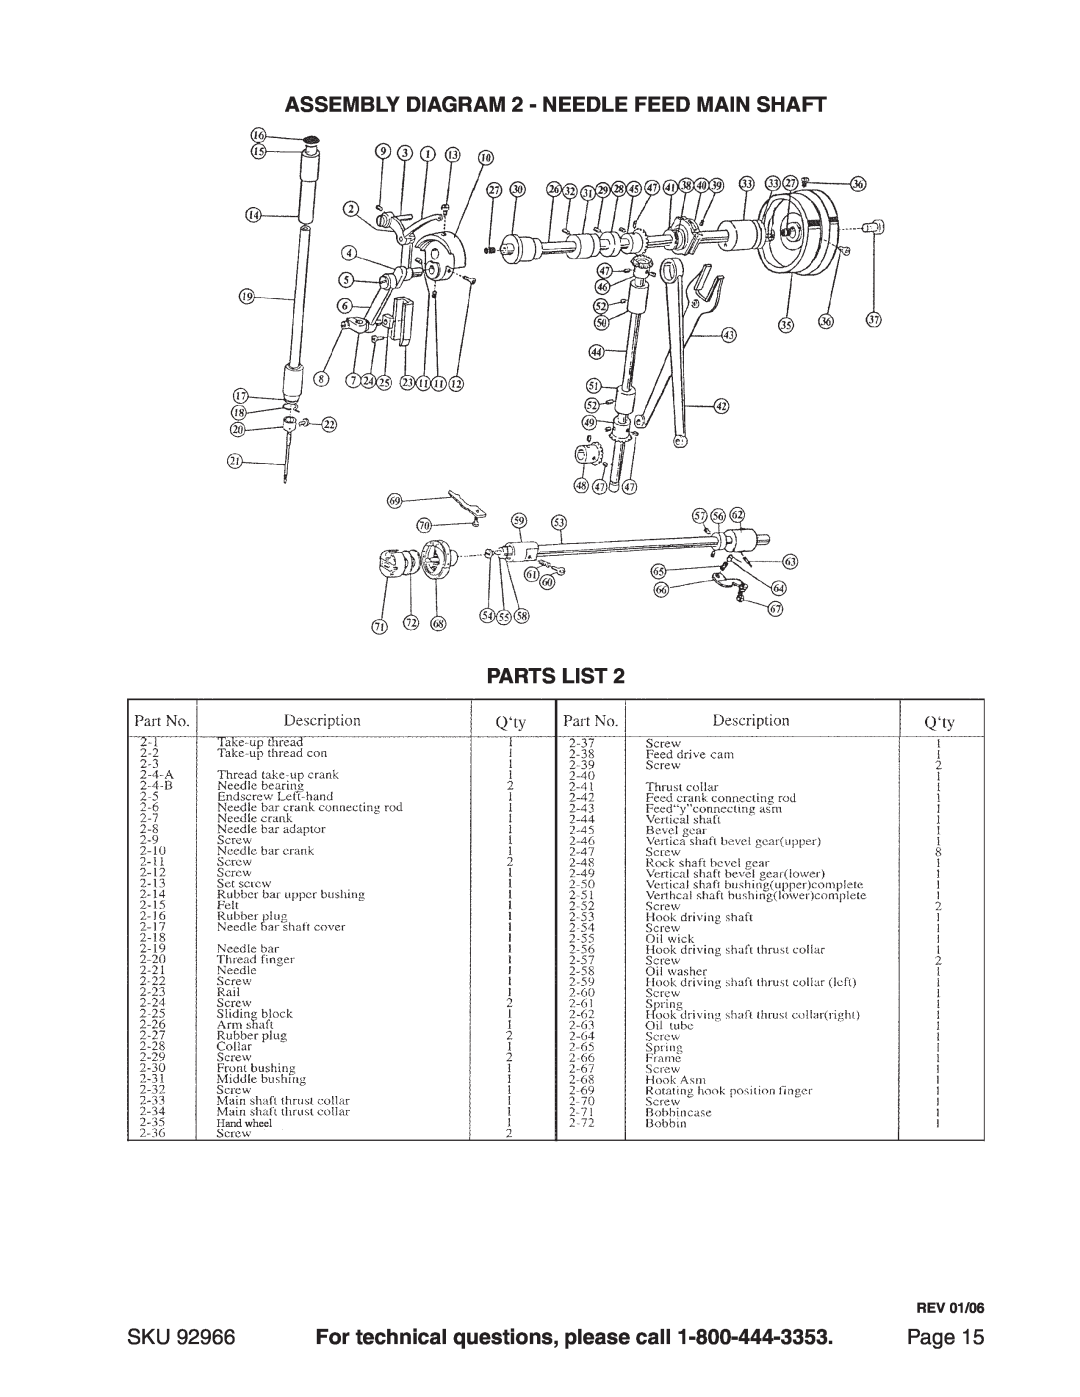 Harbor Freight Tools 92966 ASSEMBLY Diagram 2 - Needle feed main shaft PARTS LIST, For technical questions, please call 